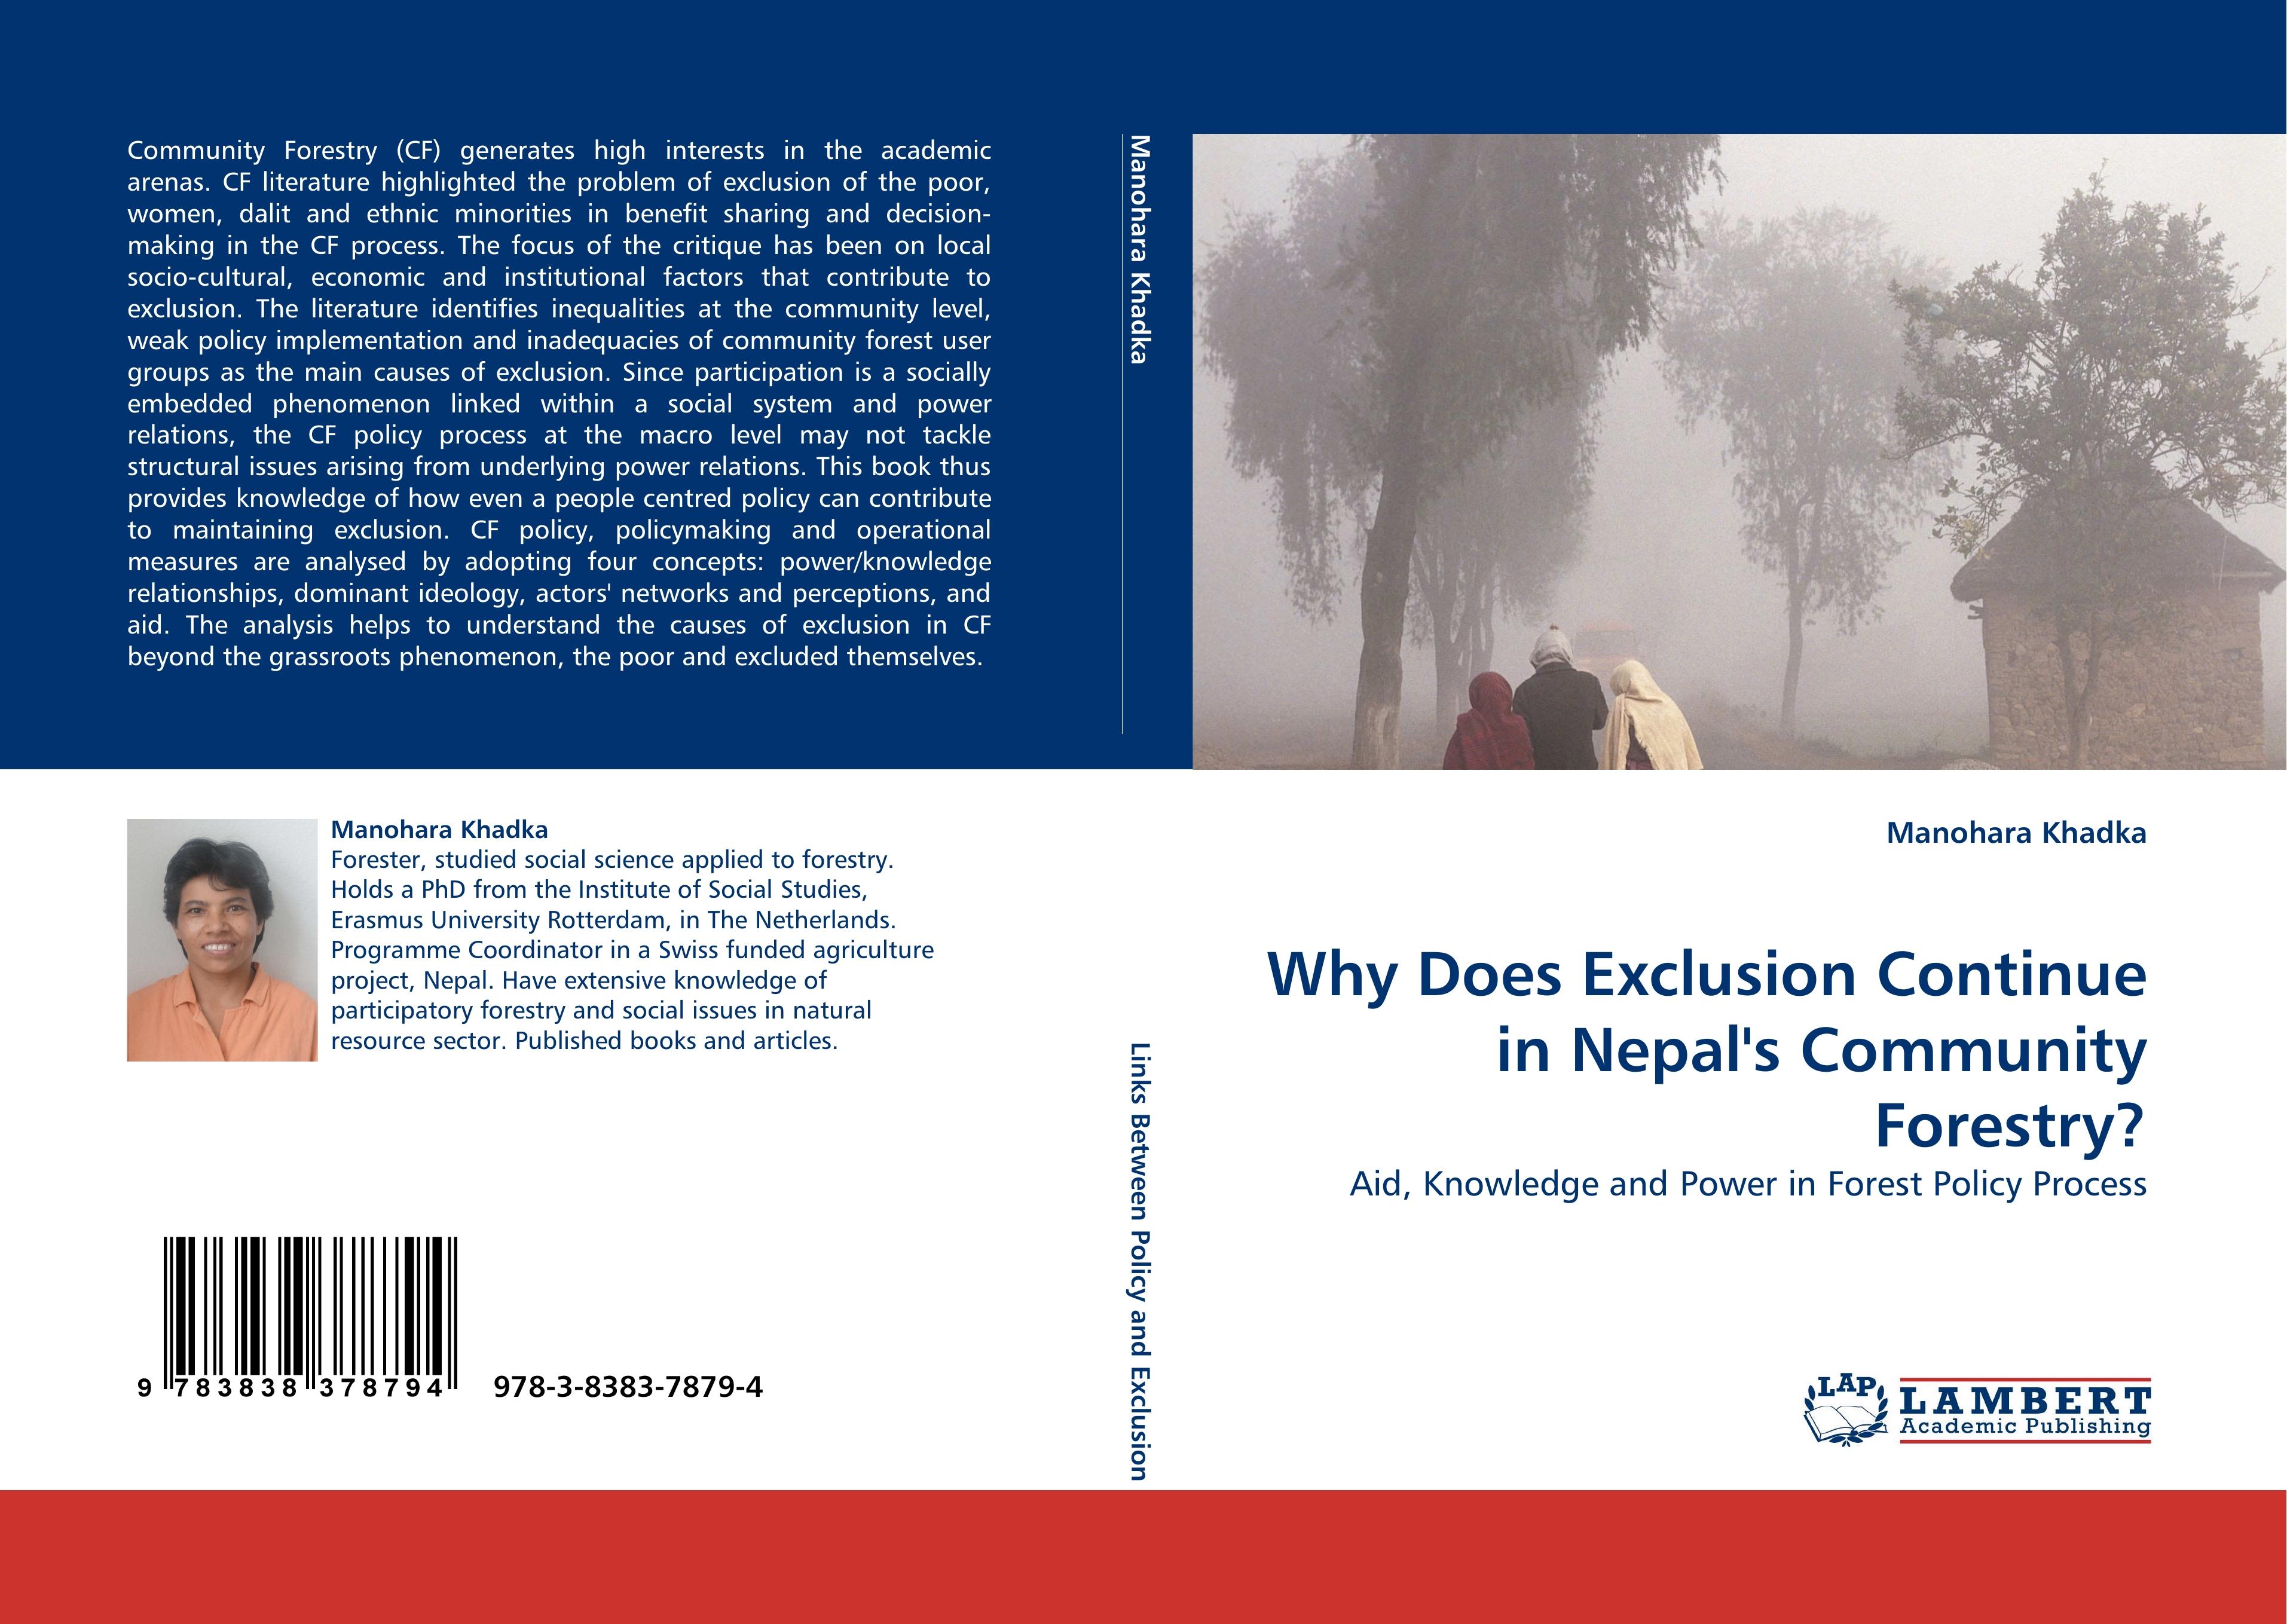 Why Does Exclusion Continue in Nepal's Community Forestry? - Khadka, Manohara